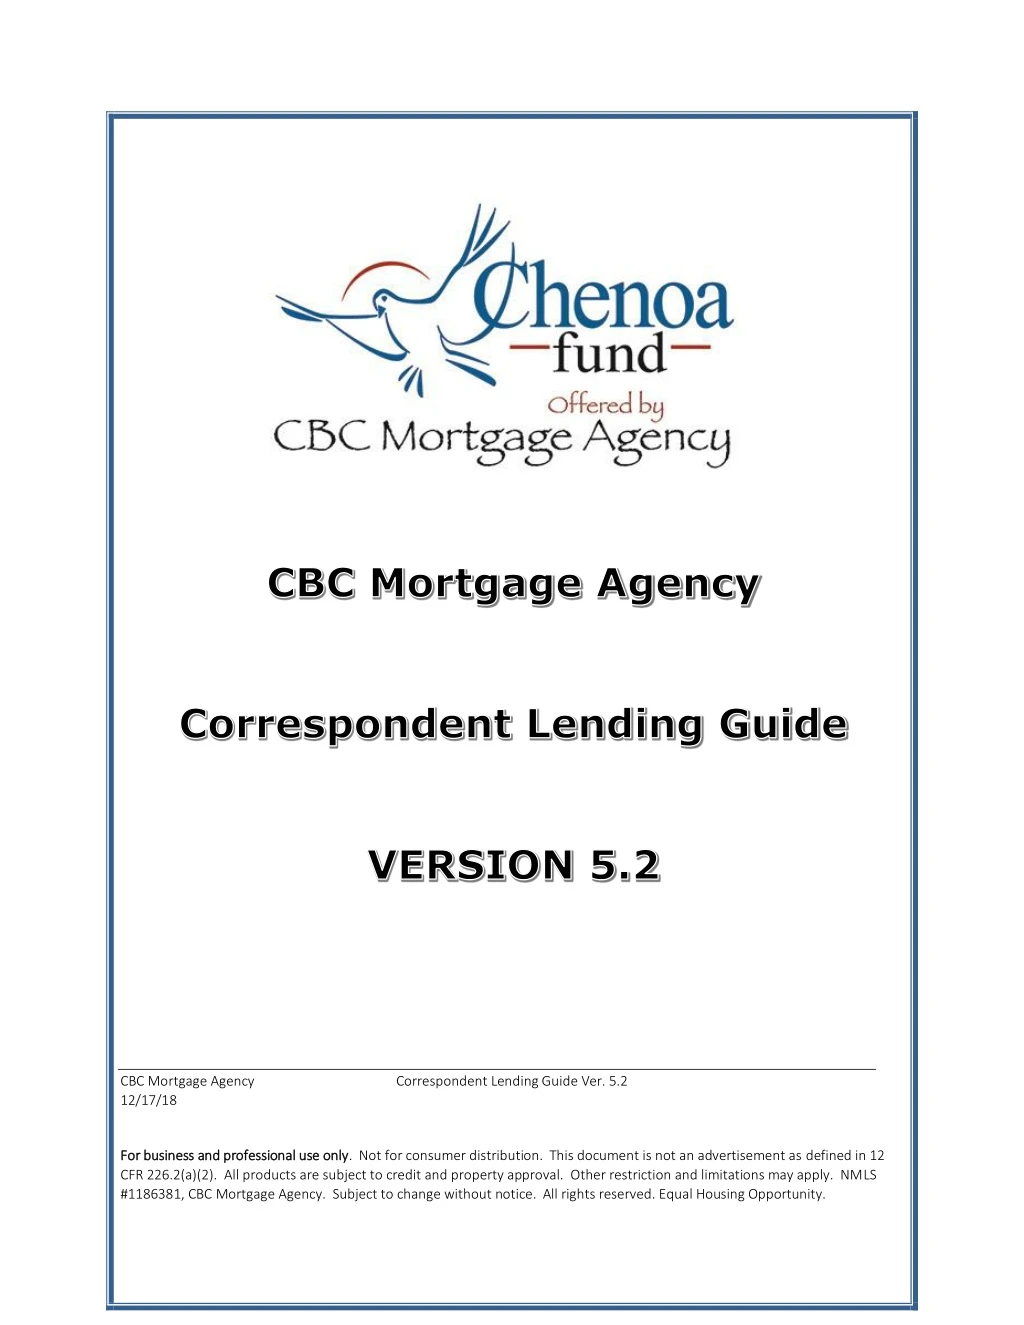 cbc mortgage agency 12 17 18